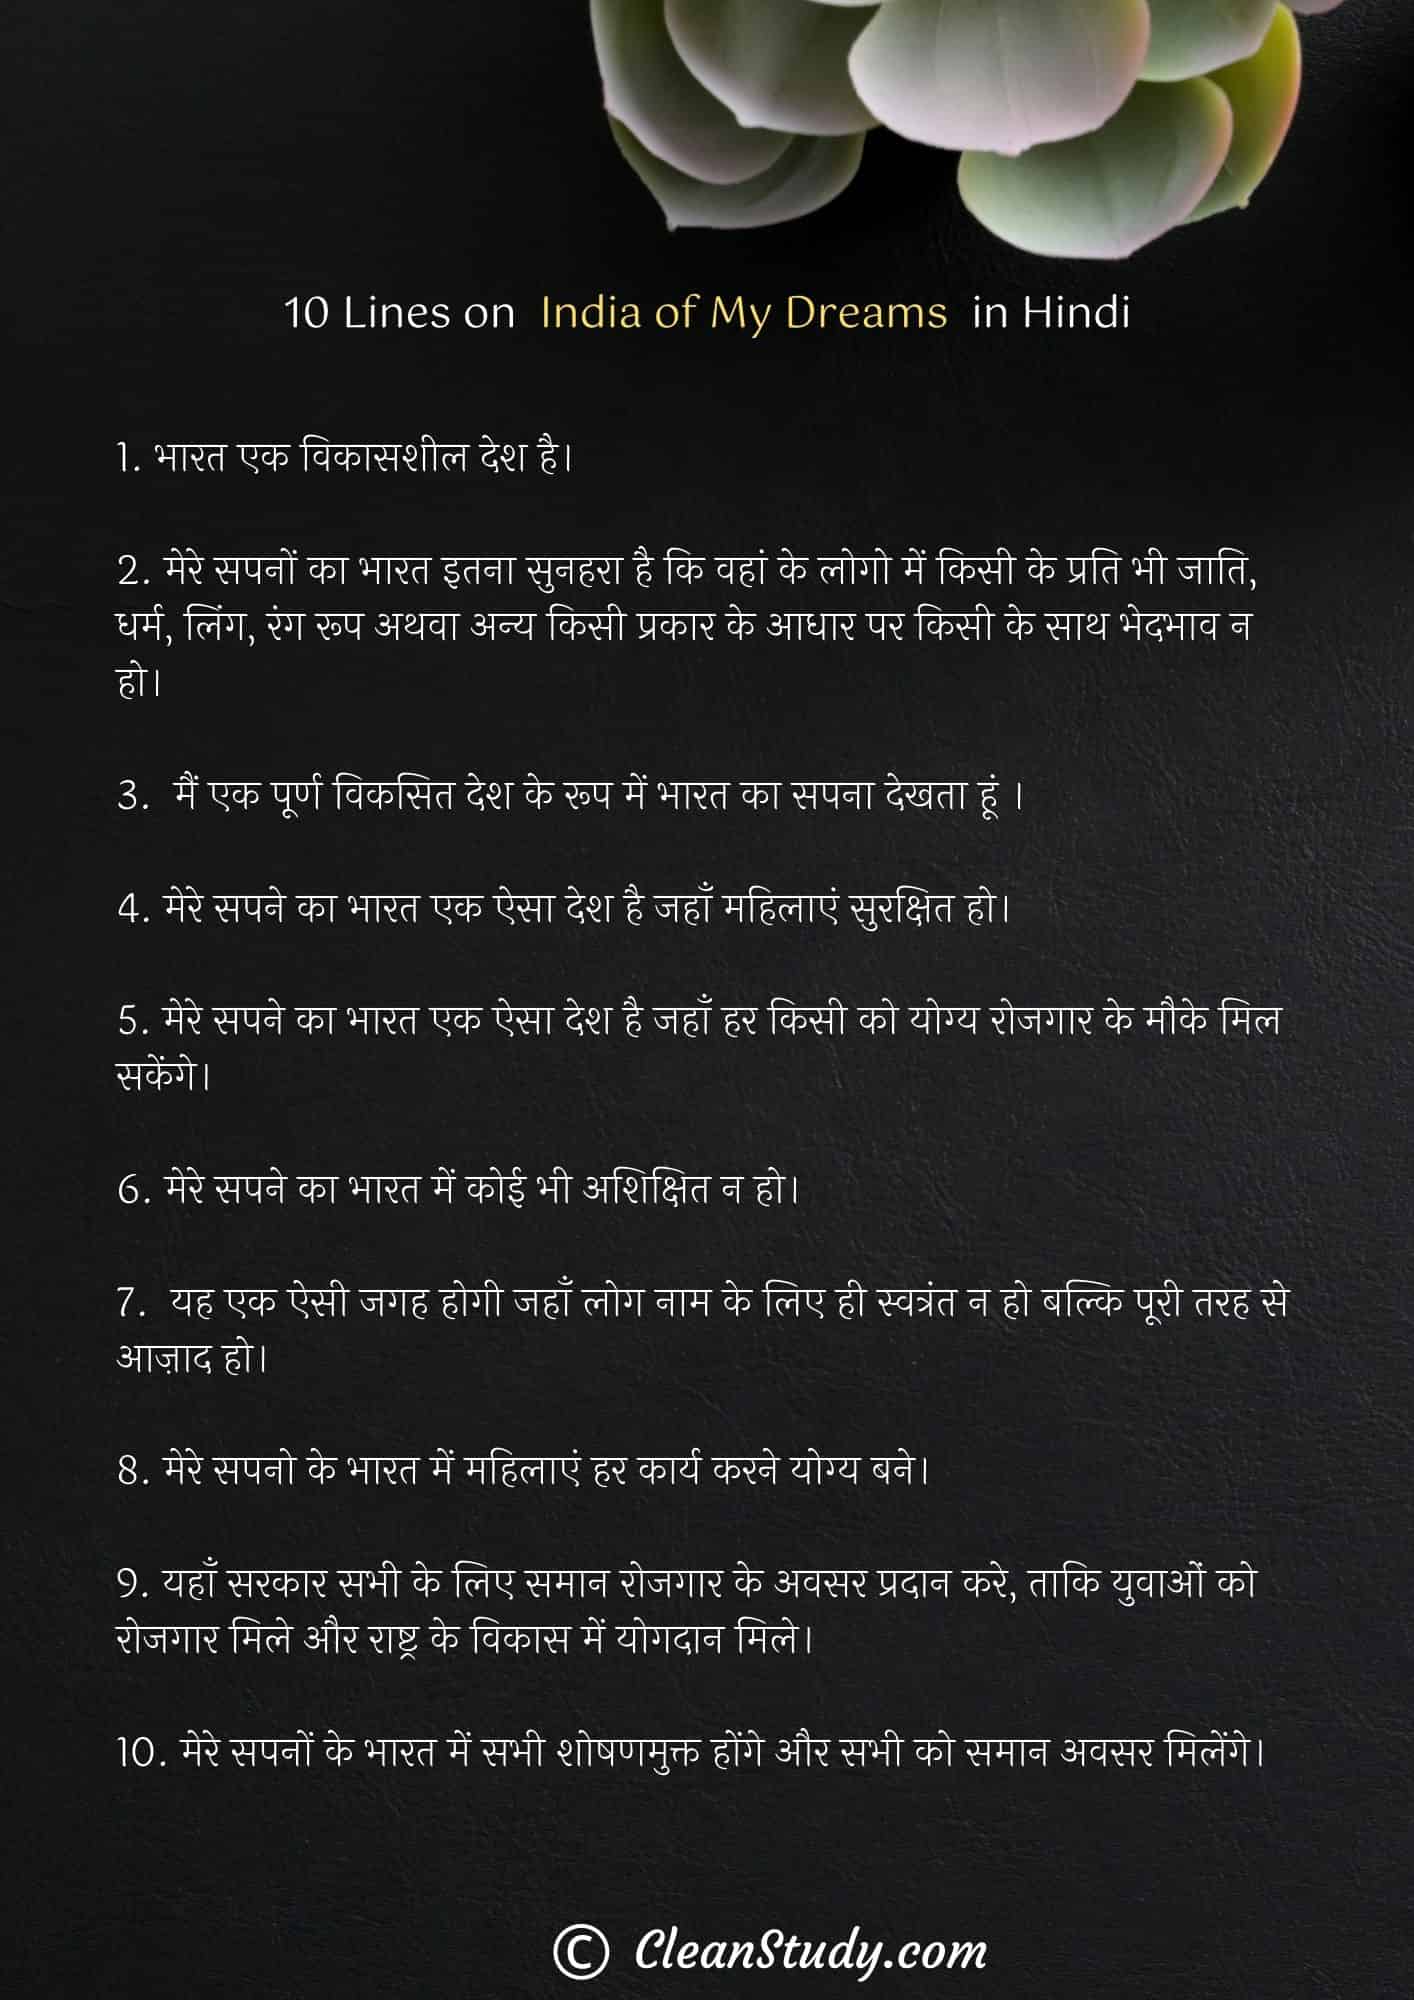 10 Lines on India of My Dreams in Hindi